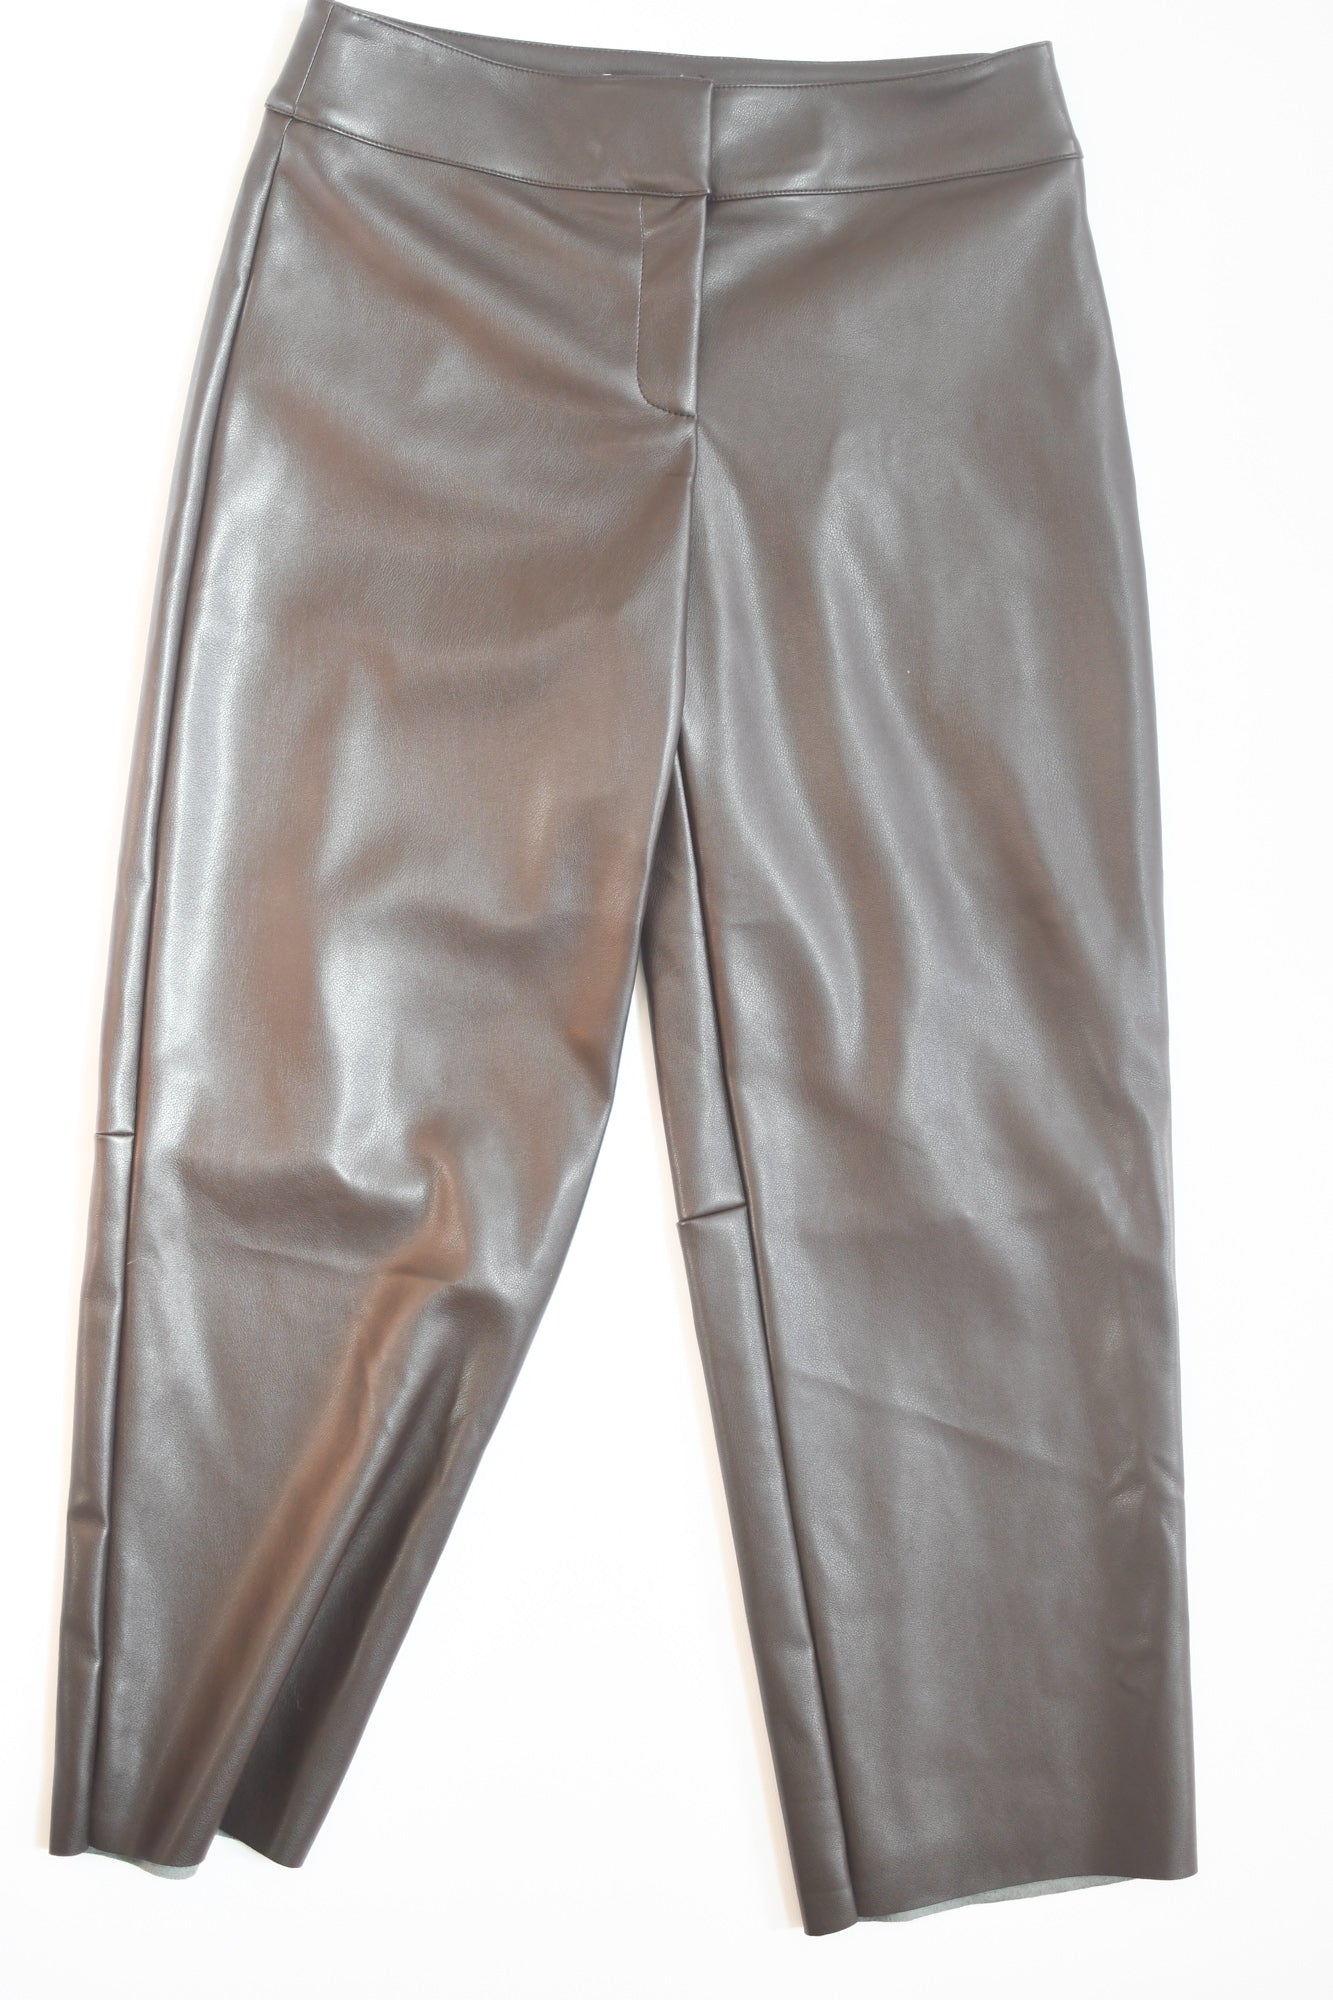 DREW RILEY CHOCOLATE FAUX LEATHER PANT